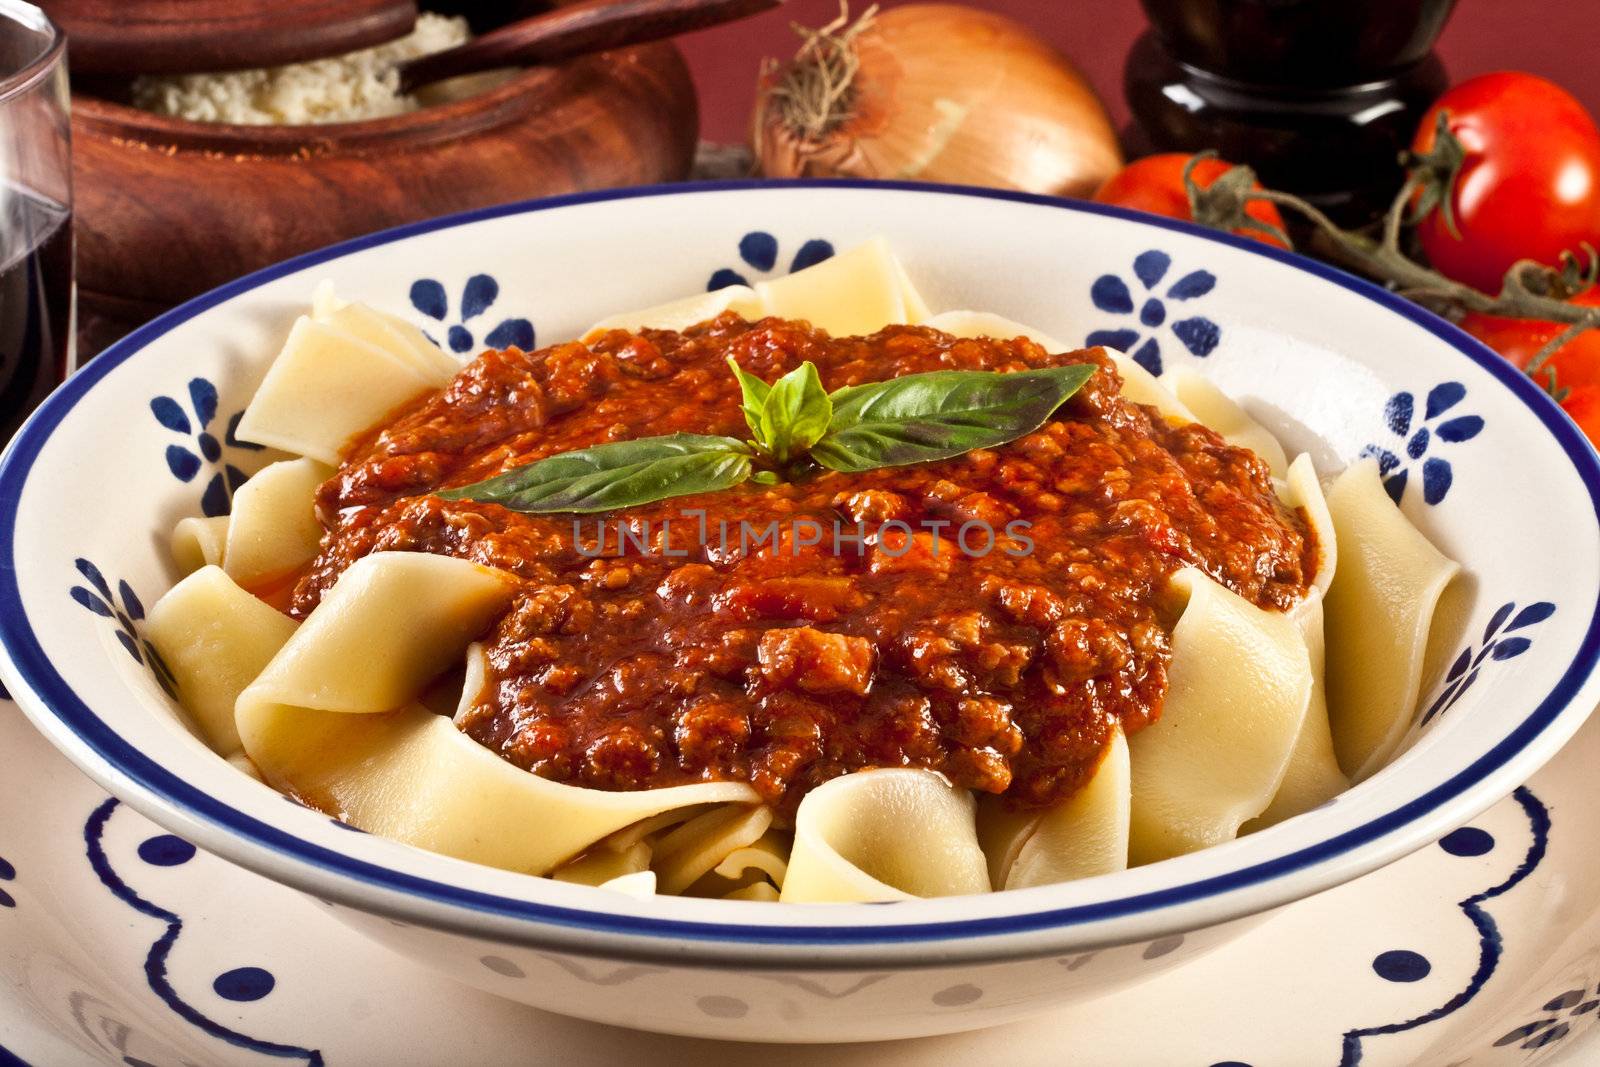 tagliatelle bolognsese - meat sauce and basil